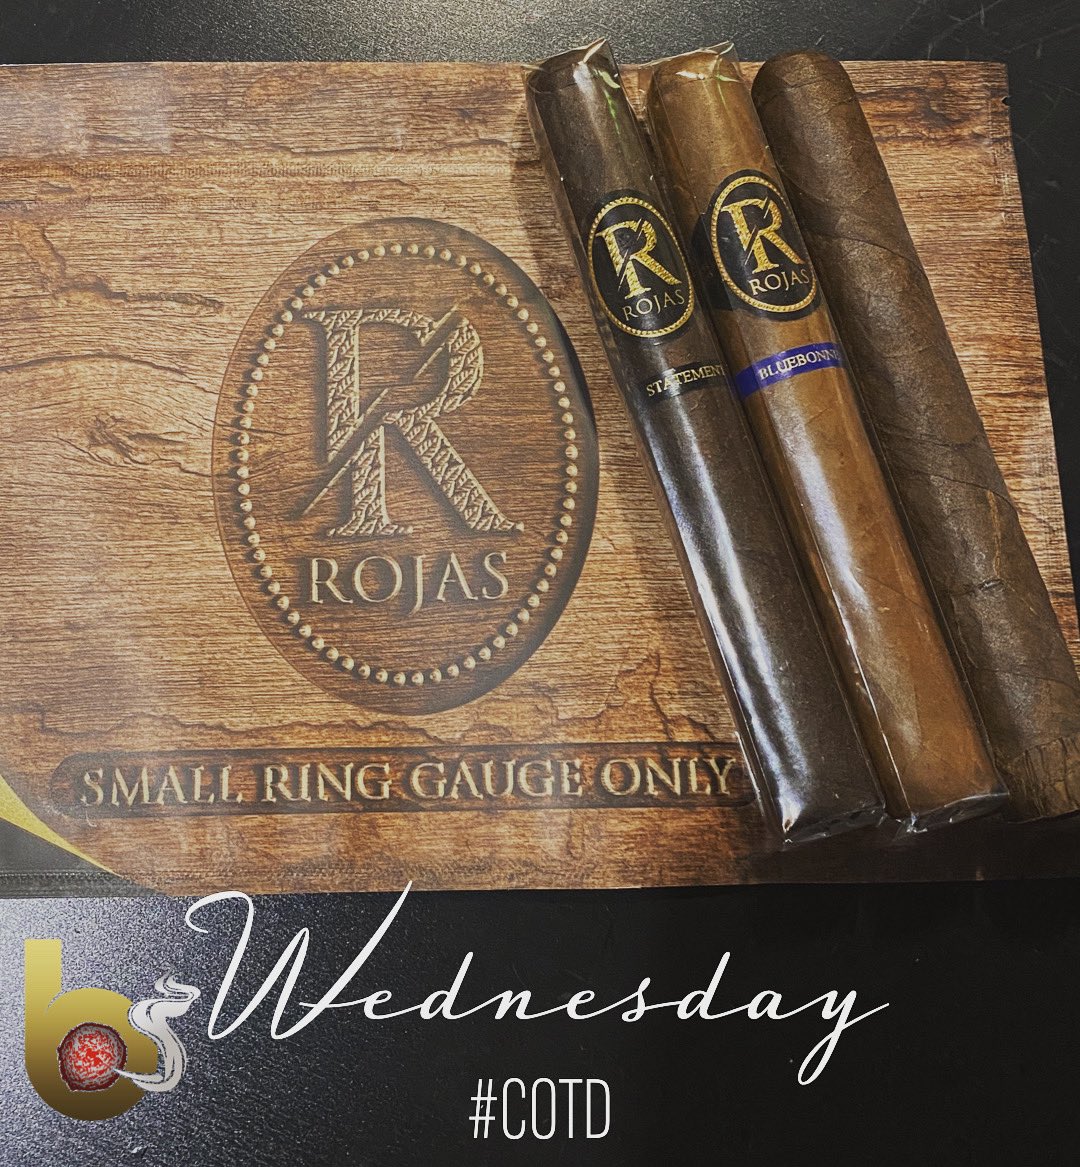 Today’s Cigar of the Day #COTD are all things @RojasCigars Grab all three blends and receive 15% OFF your purchase today. PSSITA💨 #blowinsmokecigarlounge #blowinsmoke #cigaraficionado #stogie #botl #sotl #pssita #cigarporn #cigarart #cigars #dfwcigaralliance #rojascigars